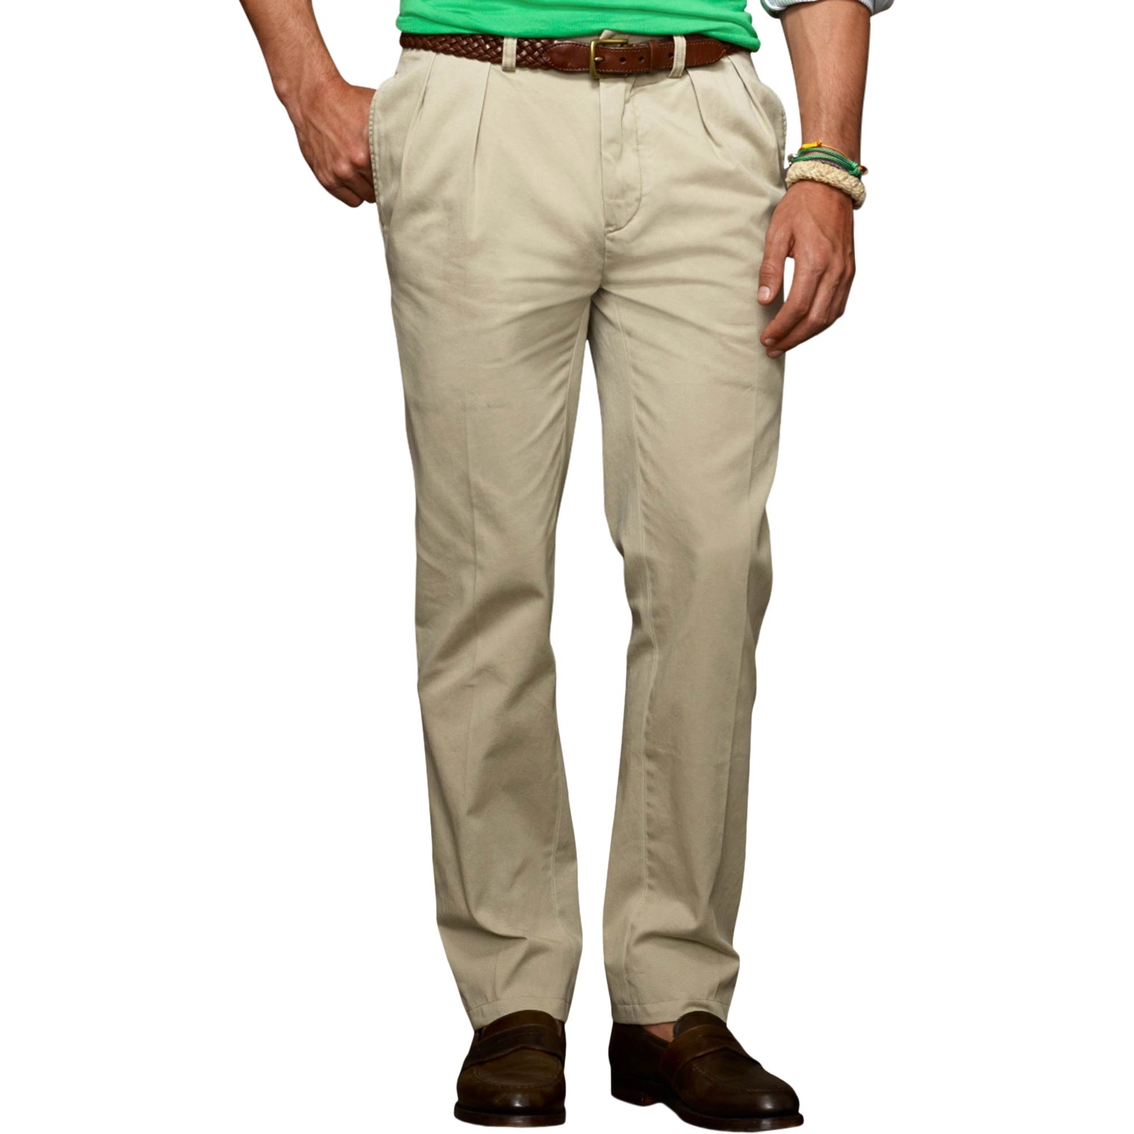 polo ralph lauren classic fit chino pants